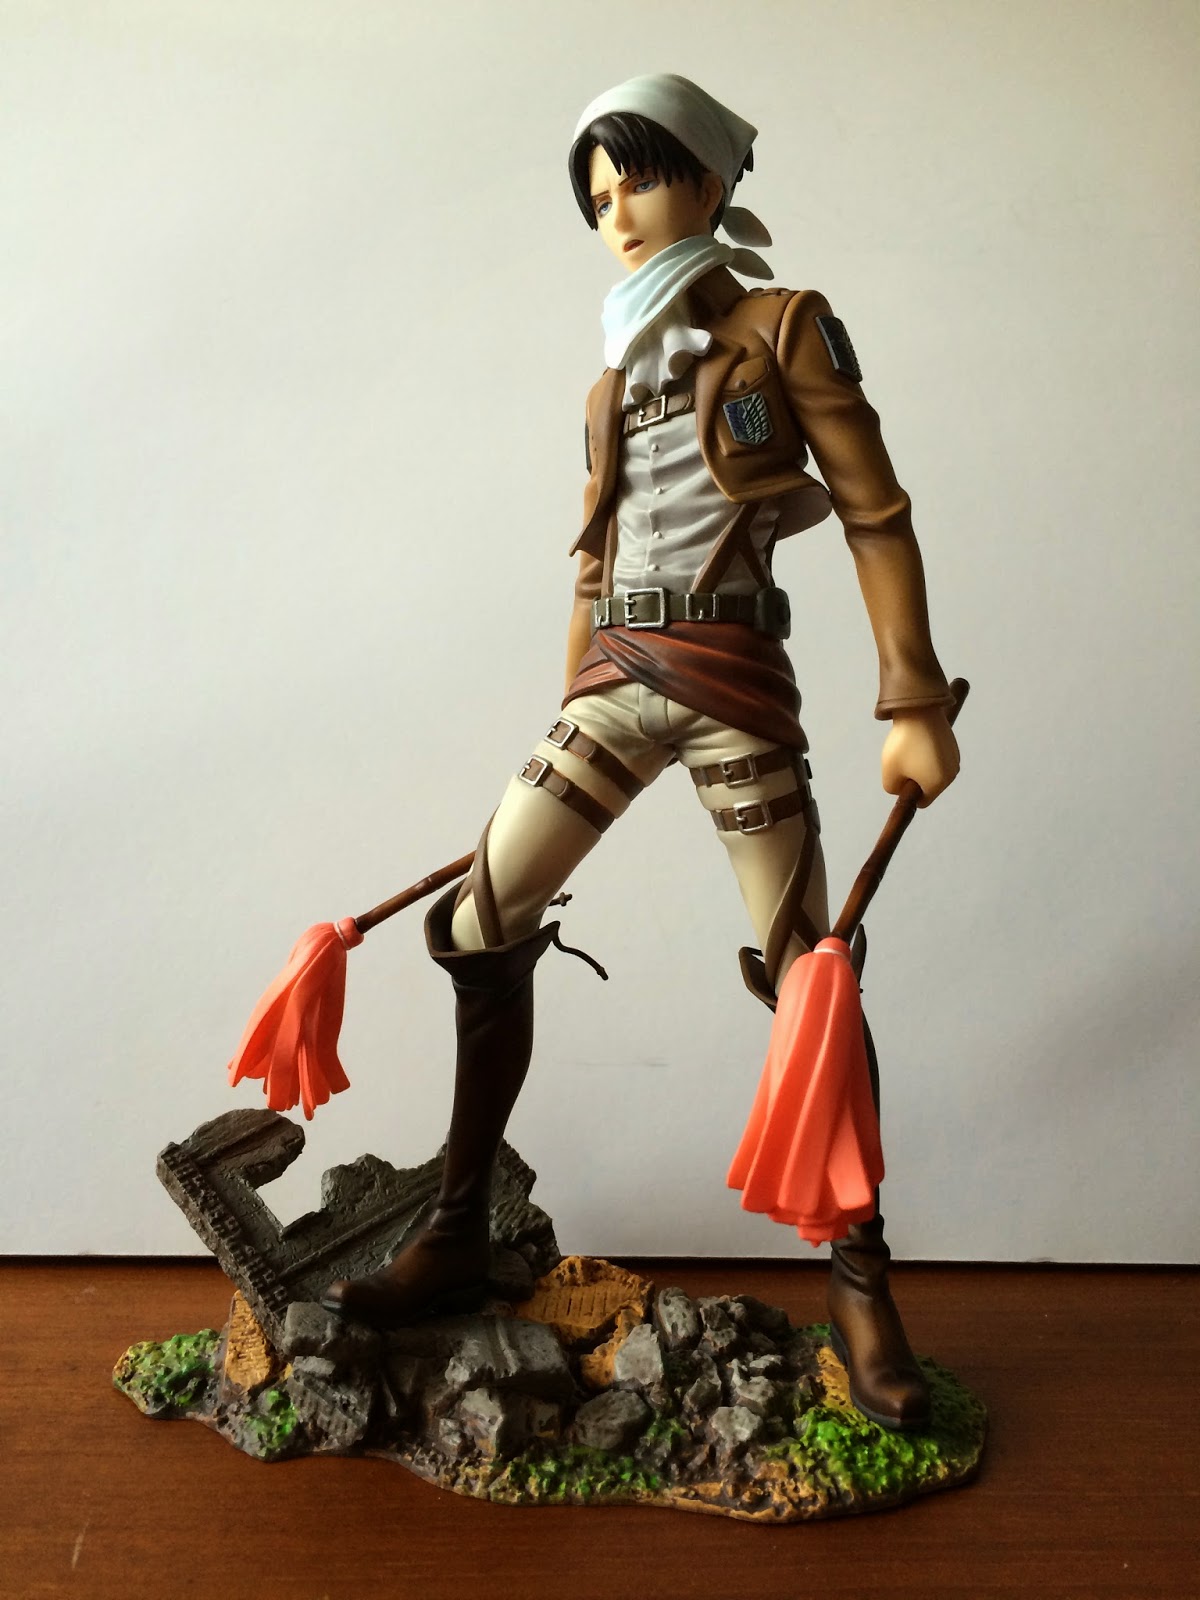 Figurine unboxing and review: Sentinel Brave-Act Shingeki no